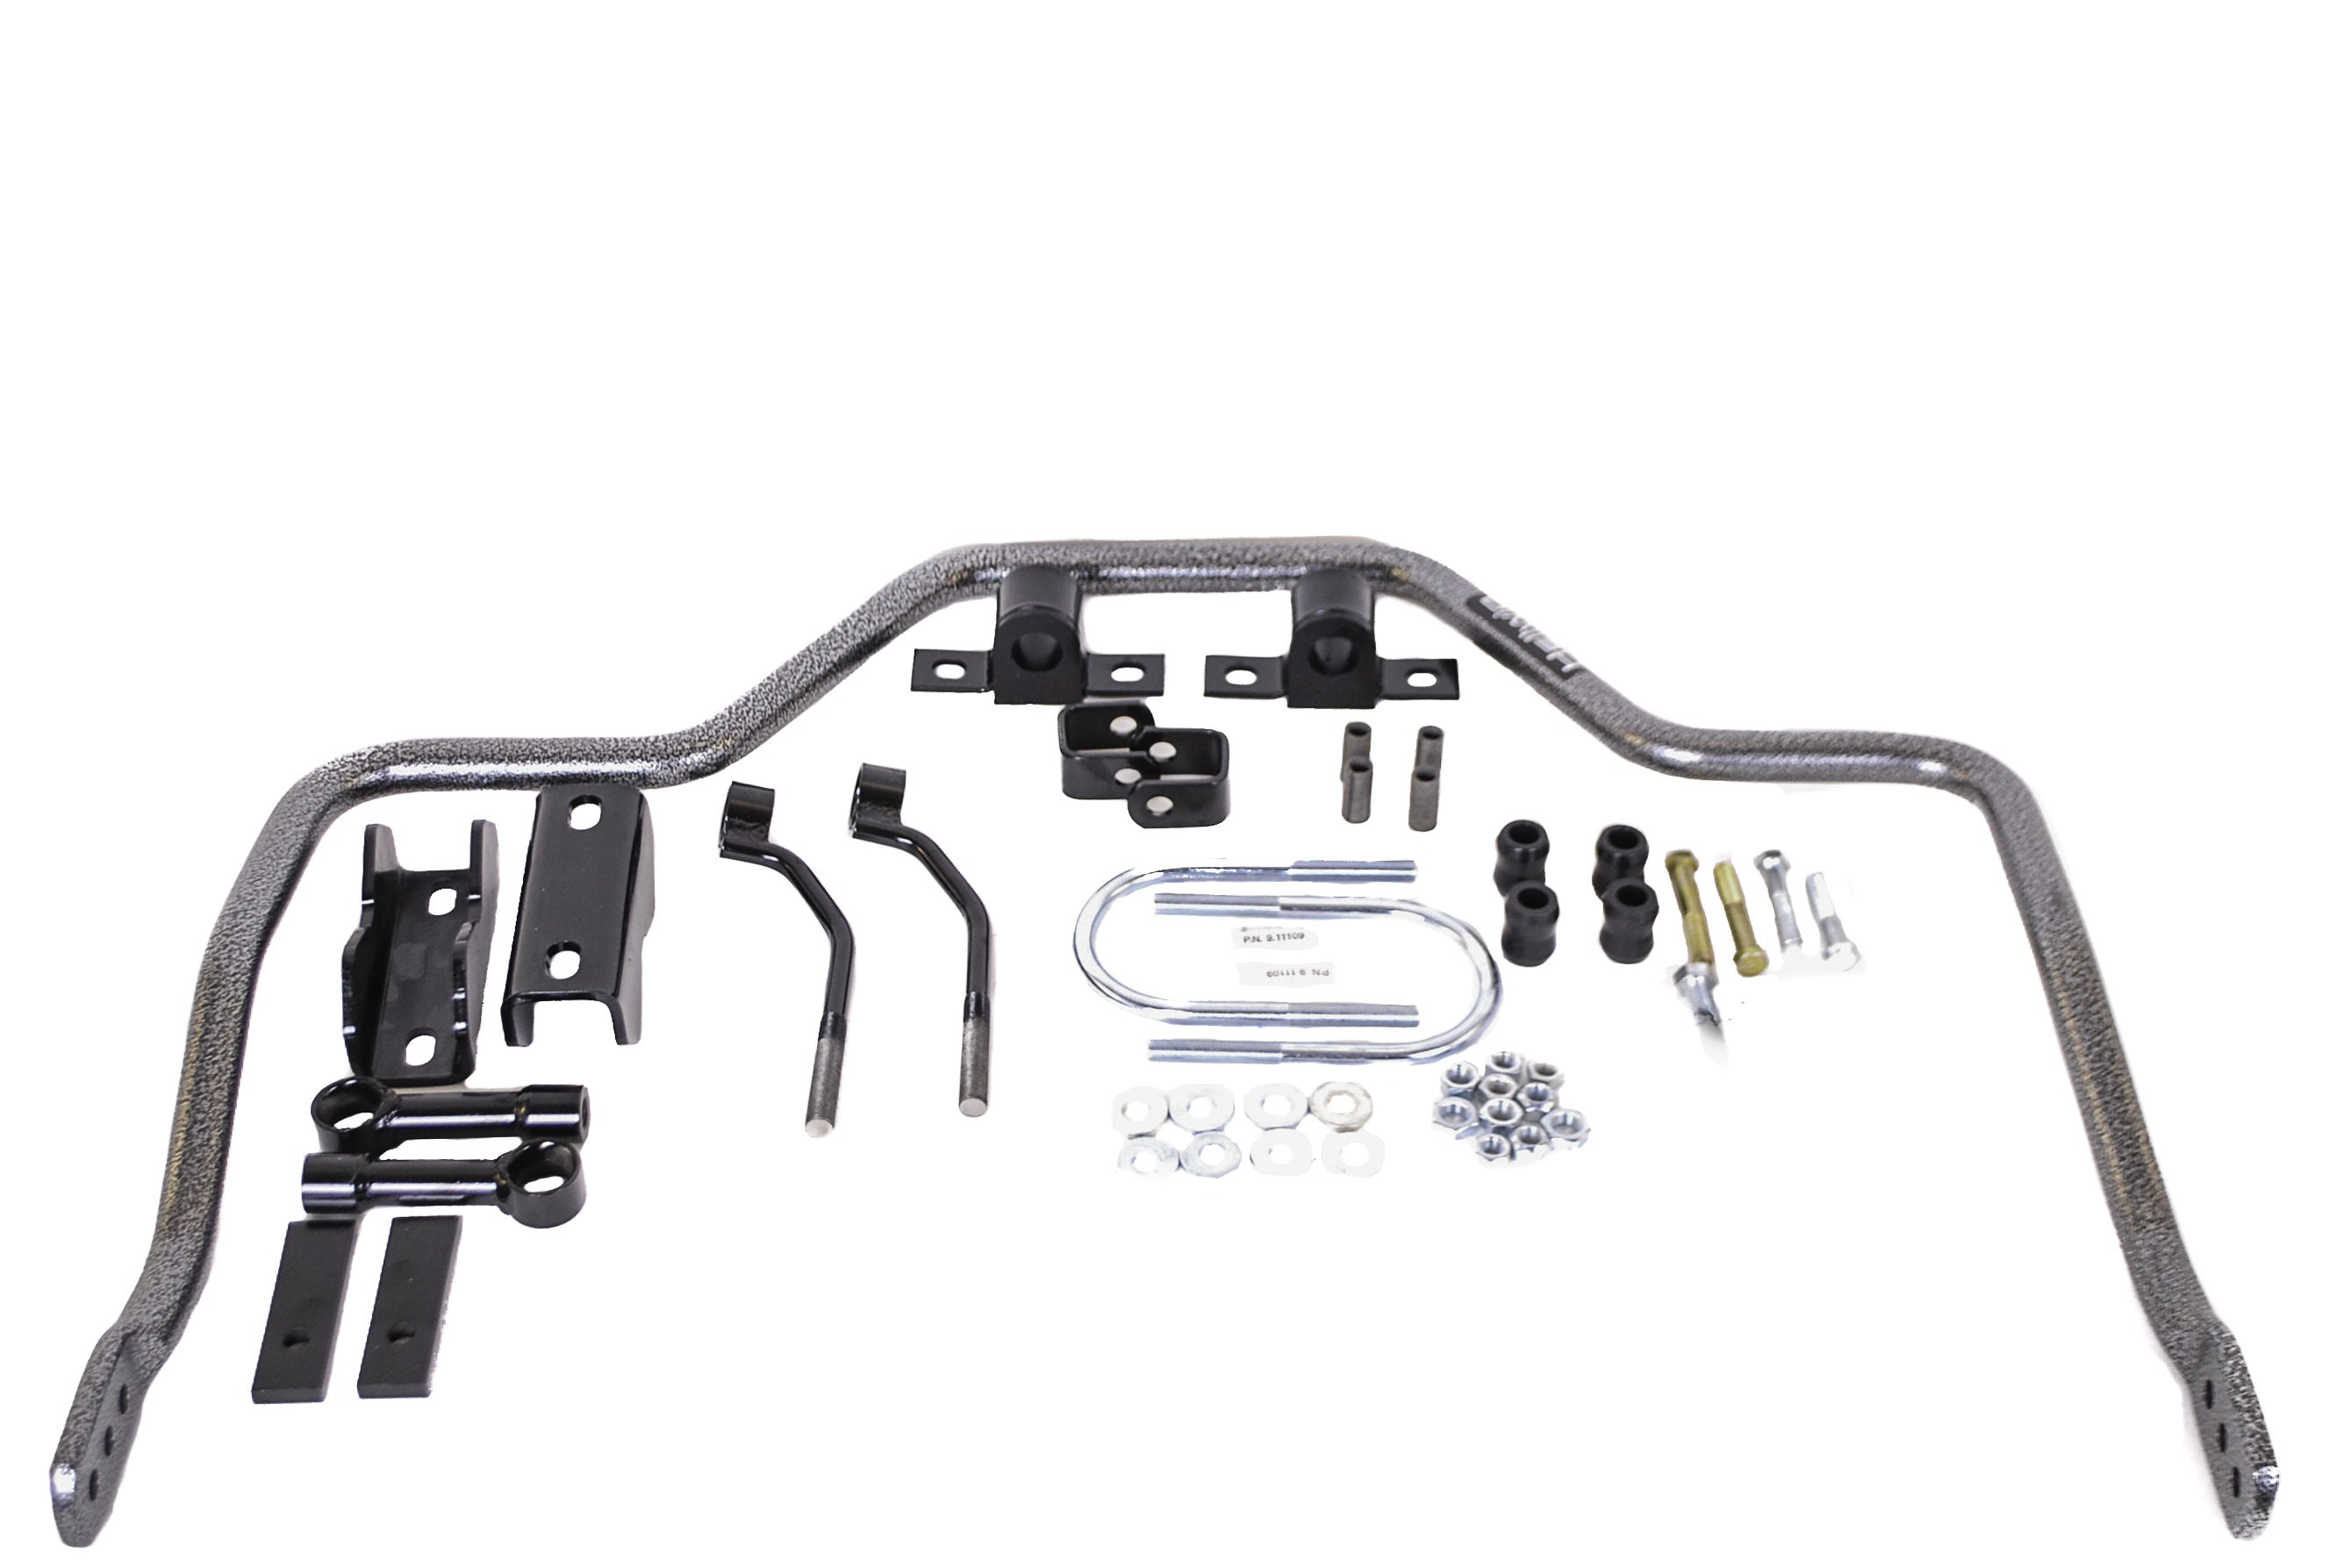 Hellwig 7705 - Rear Sway Bar Kit for Ford F-150 09-14 2WD/4WD Stock Rear Ride Height